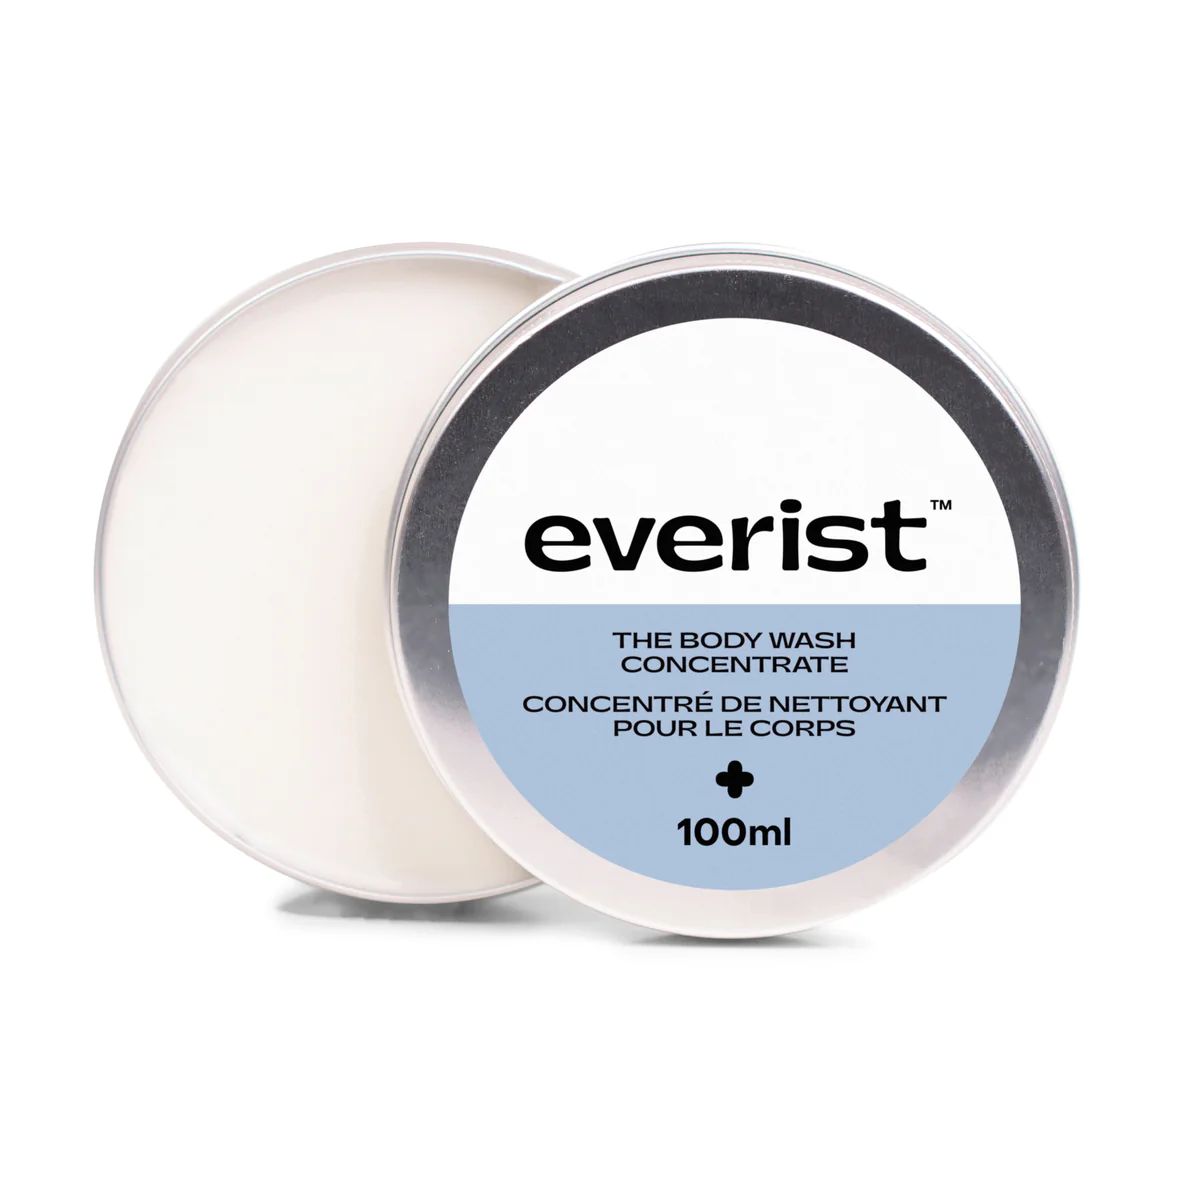 The Body Wash Concentrate Tin | Everist